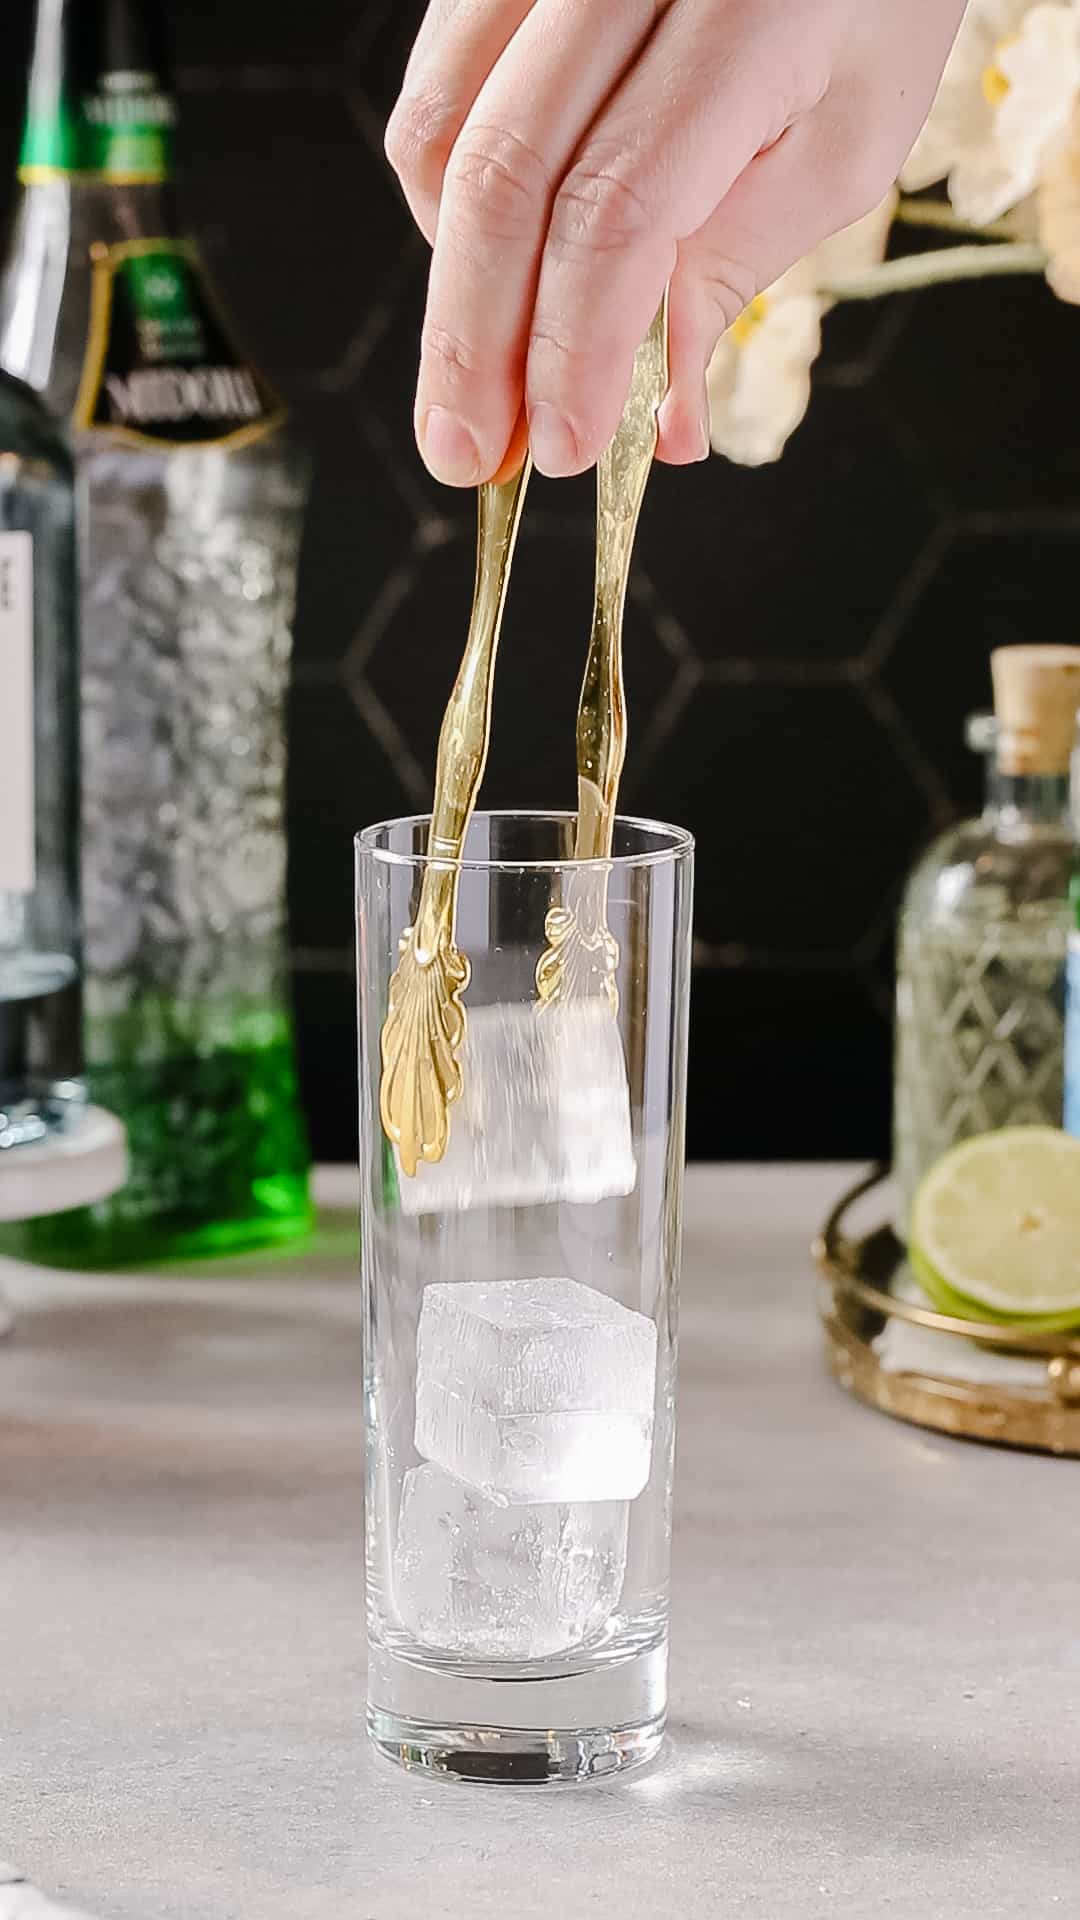 Hands using gold colored ice tongs to add ice to a Collins cocktail glass.